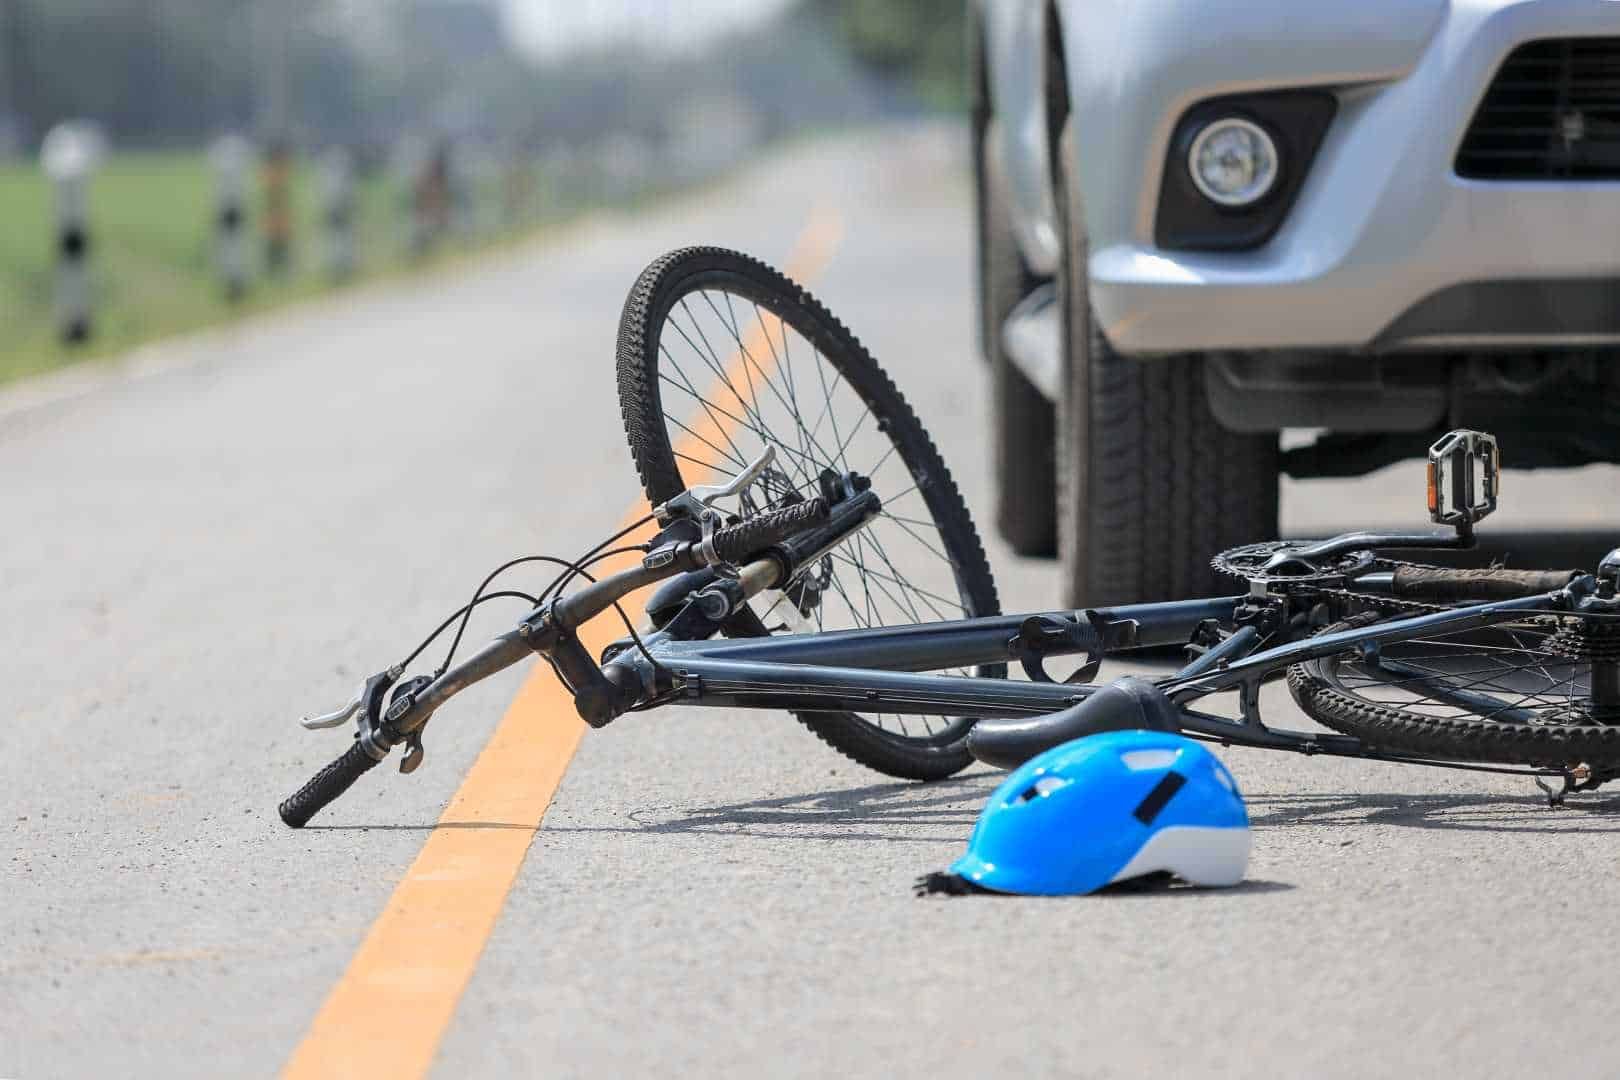 Car and Bike collision accident on street